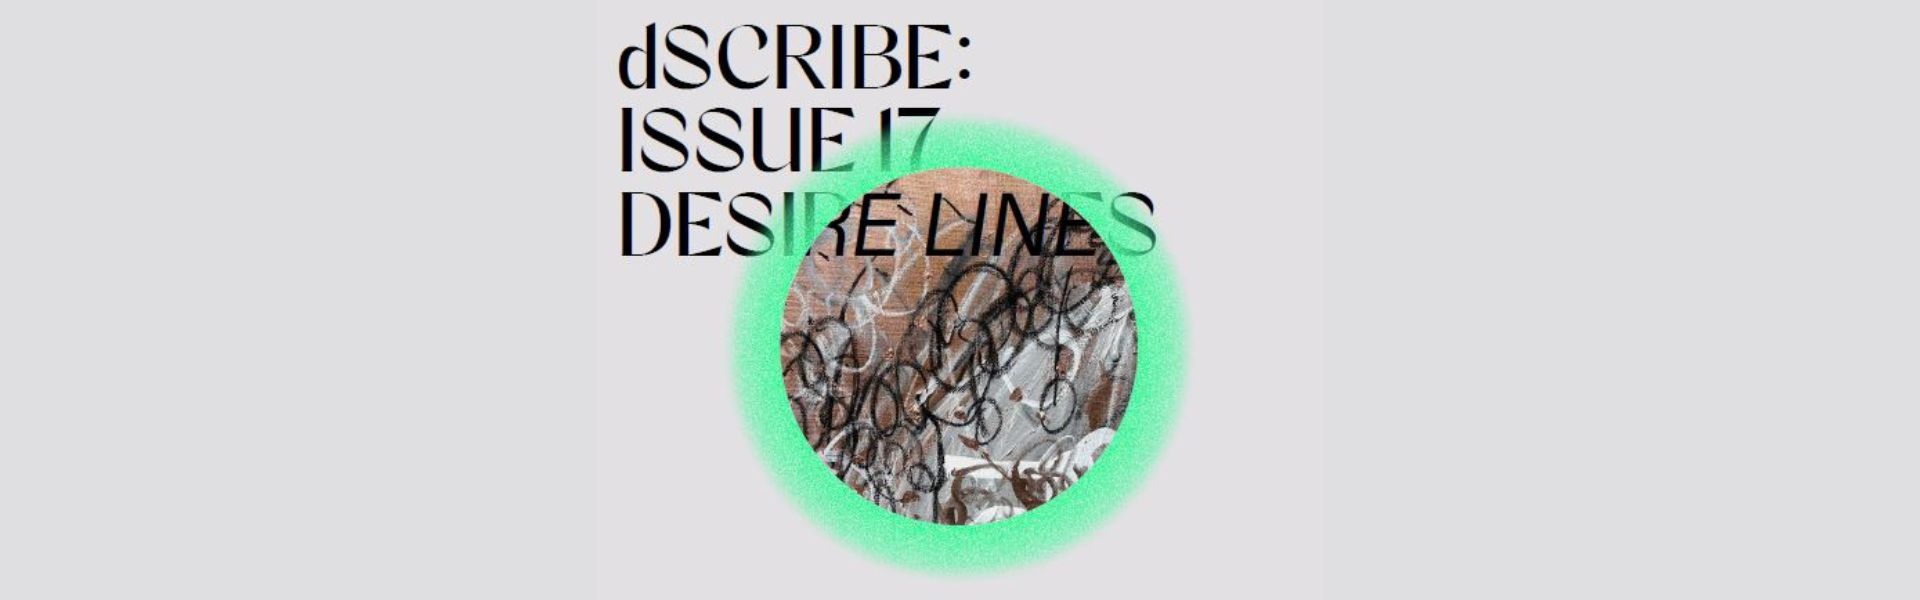 Black text saying 'dSCRIBE: Issue 17' and 'Desired Lines' sits above a lime green circle with a graffiti image inside.